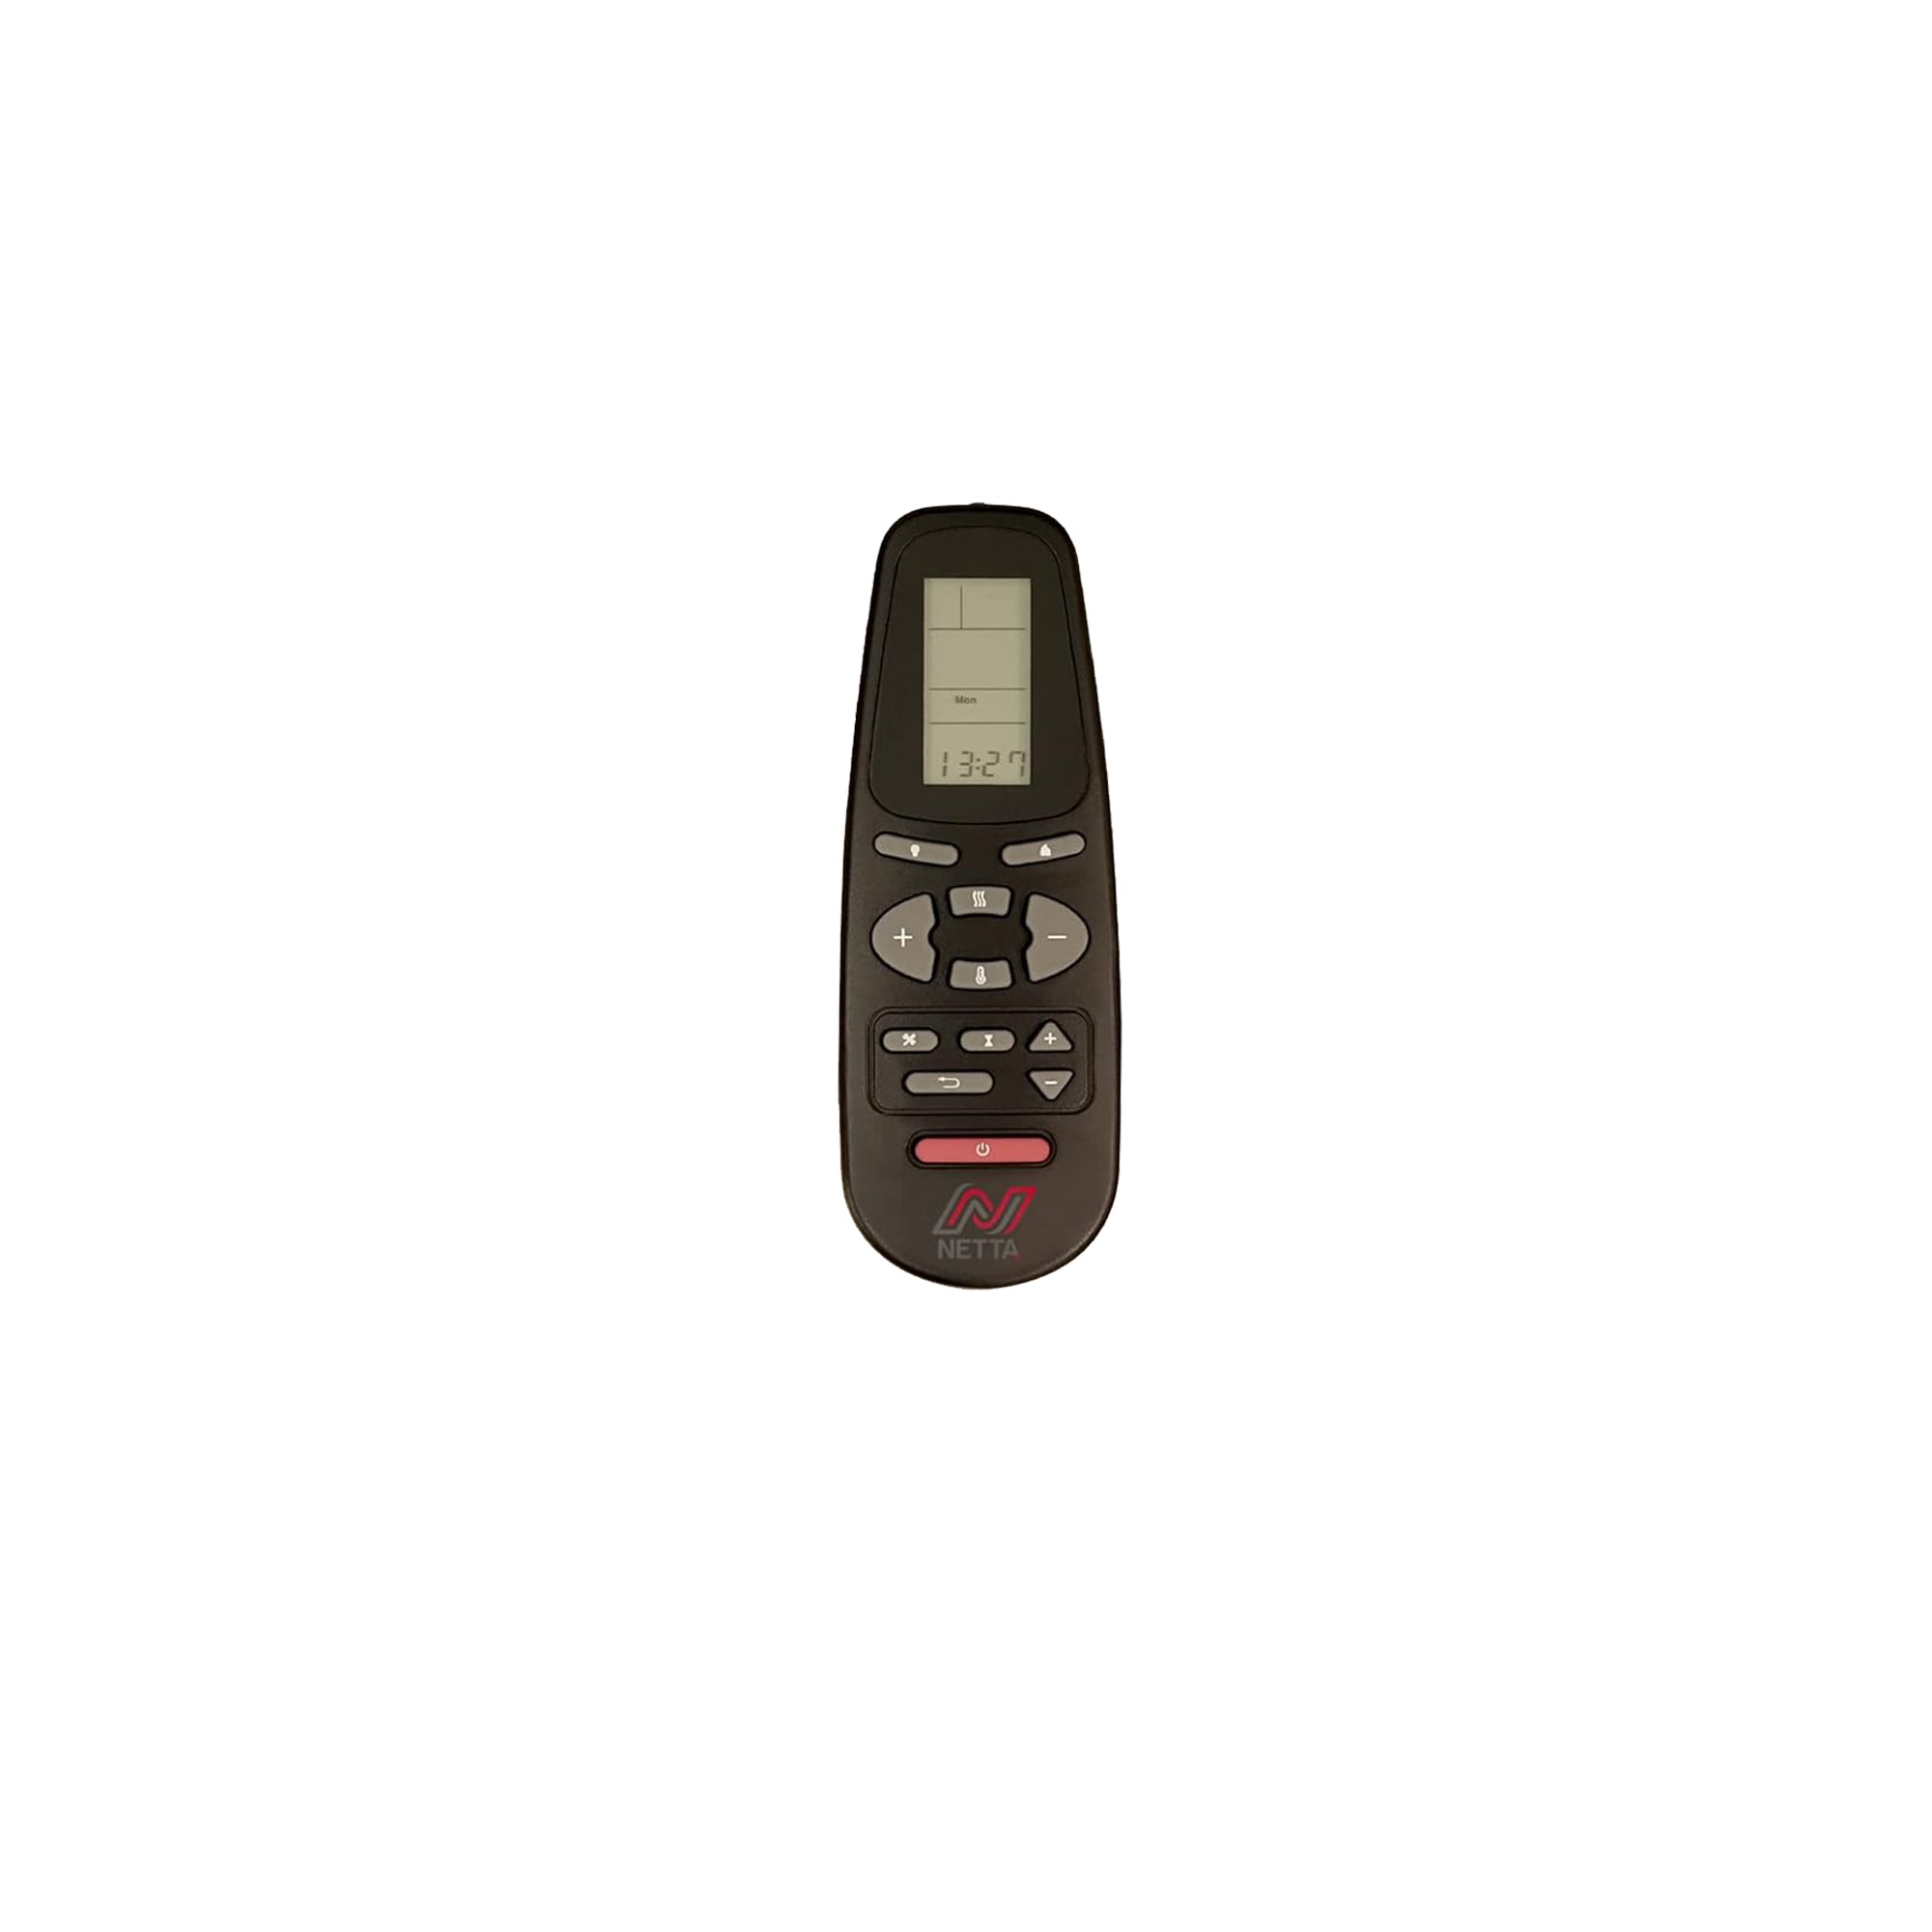 Replacement Remote For 40/50/60 NETTA Inch Electric Fireplace